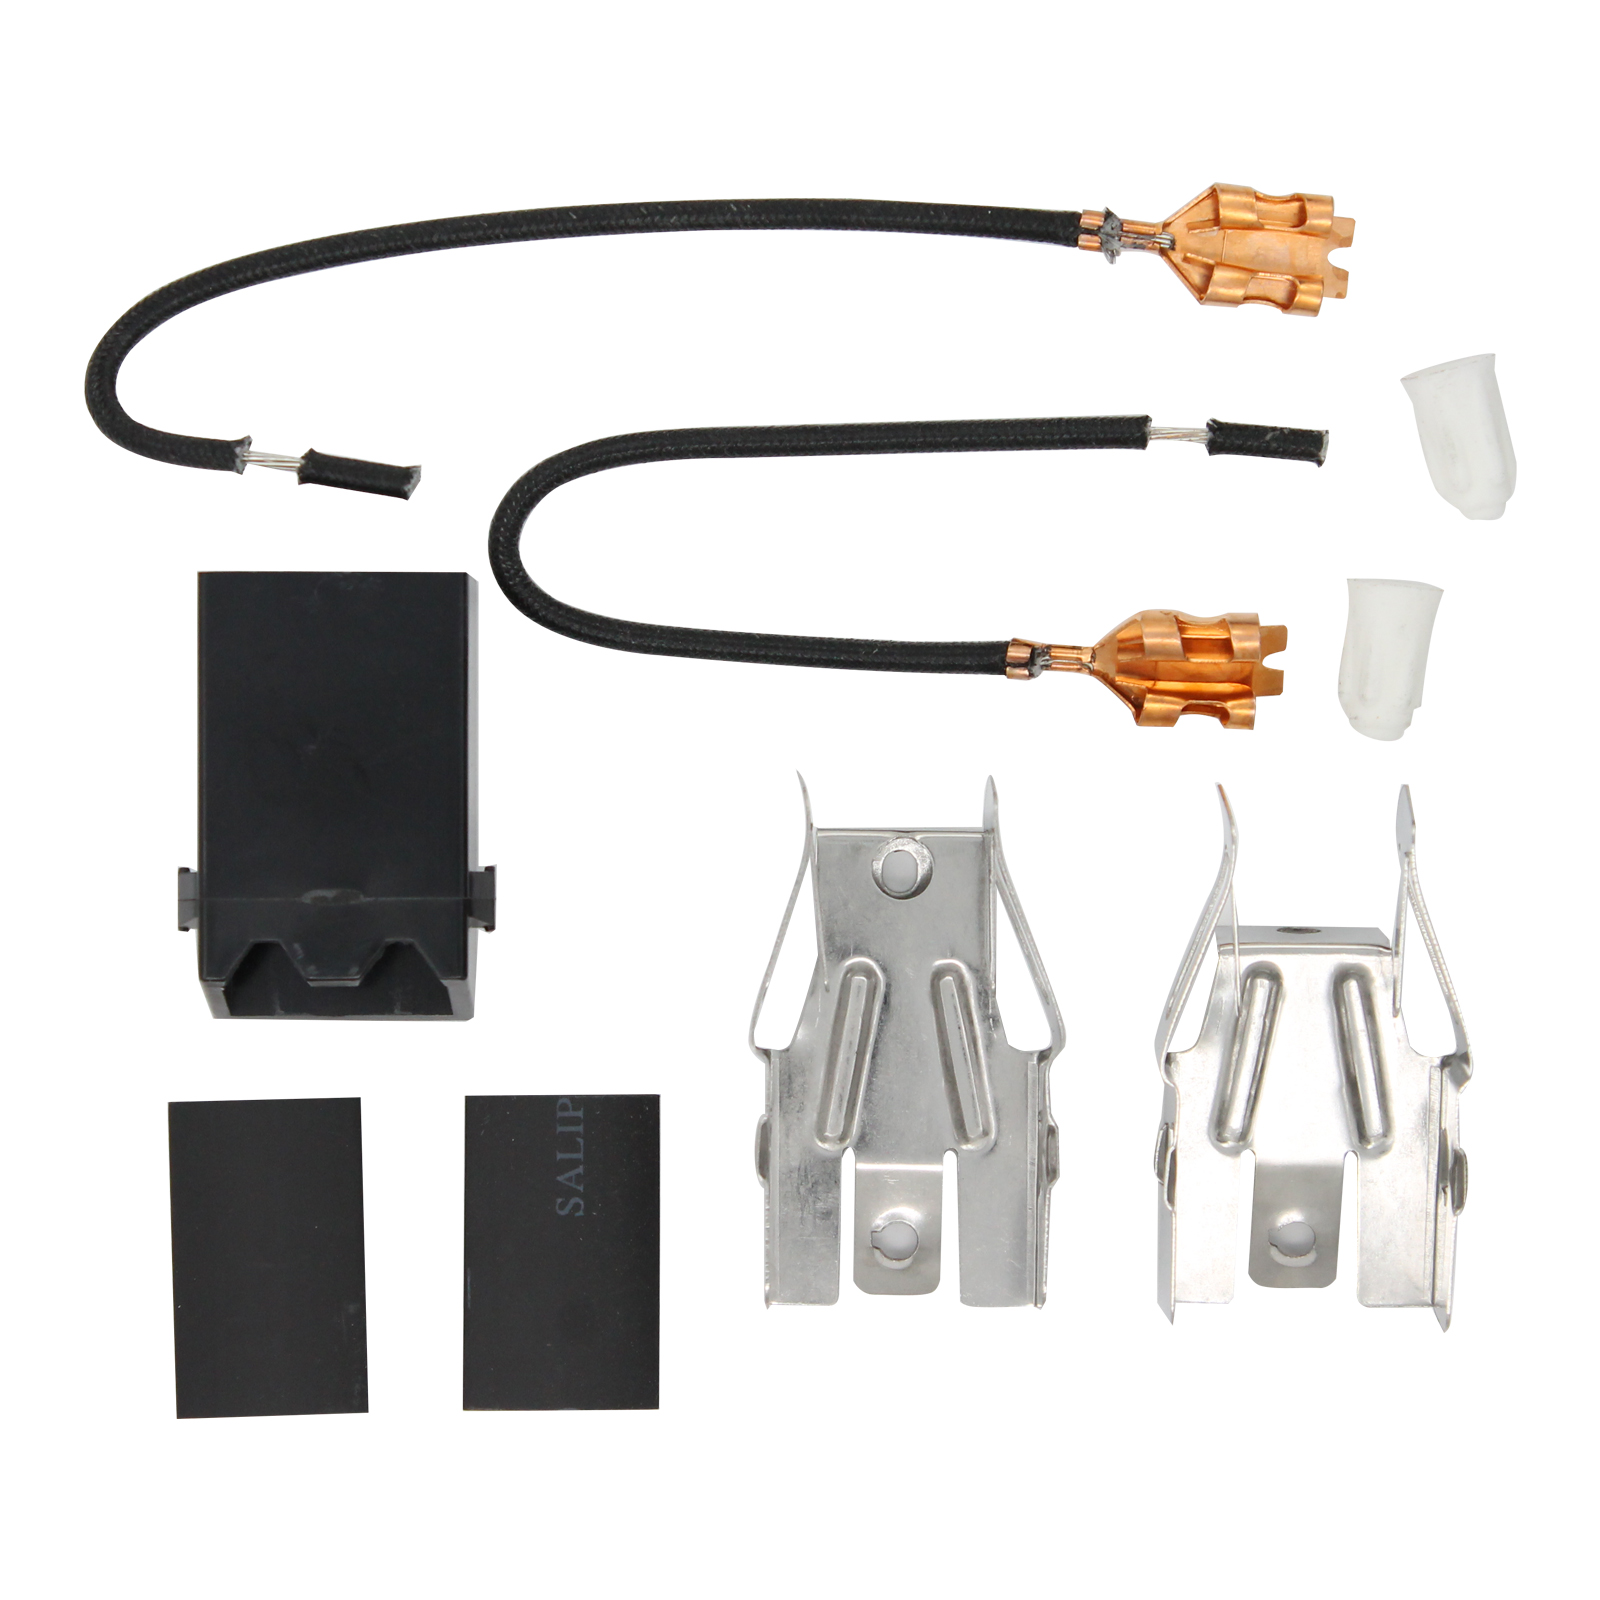 330031 Top Burner Receptacle Kit Replacement for Whirlpool RE963PXPT0 Range/Cooktop/Oven - Compatible with 330031 Range Burner Receptacle Kit - UpStart Components Brand - image 4 of 4